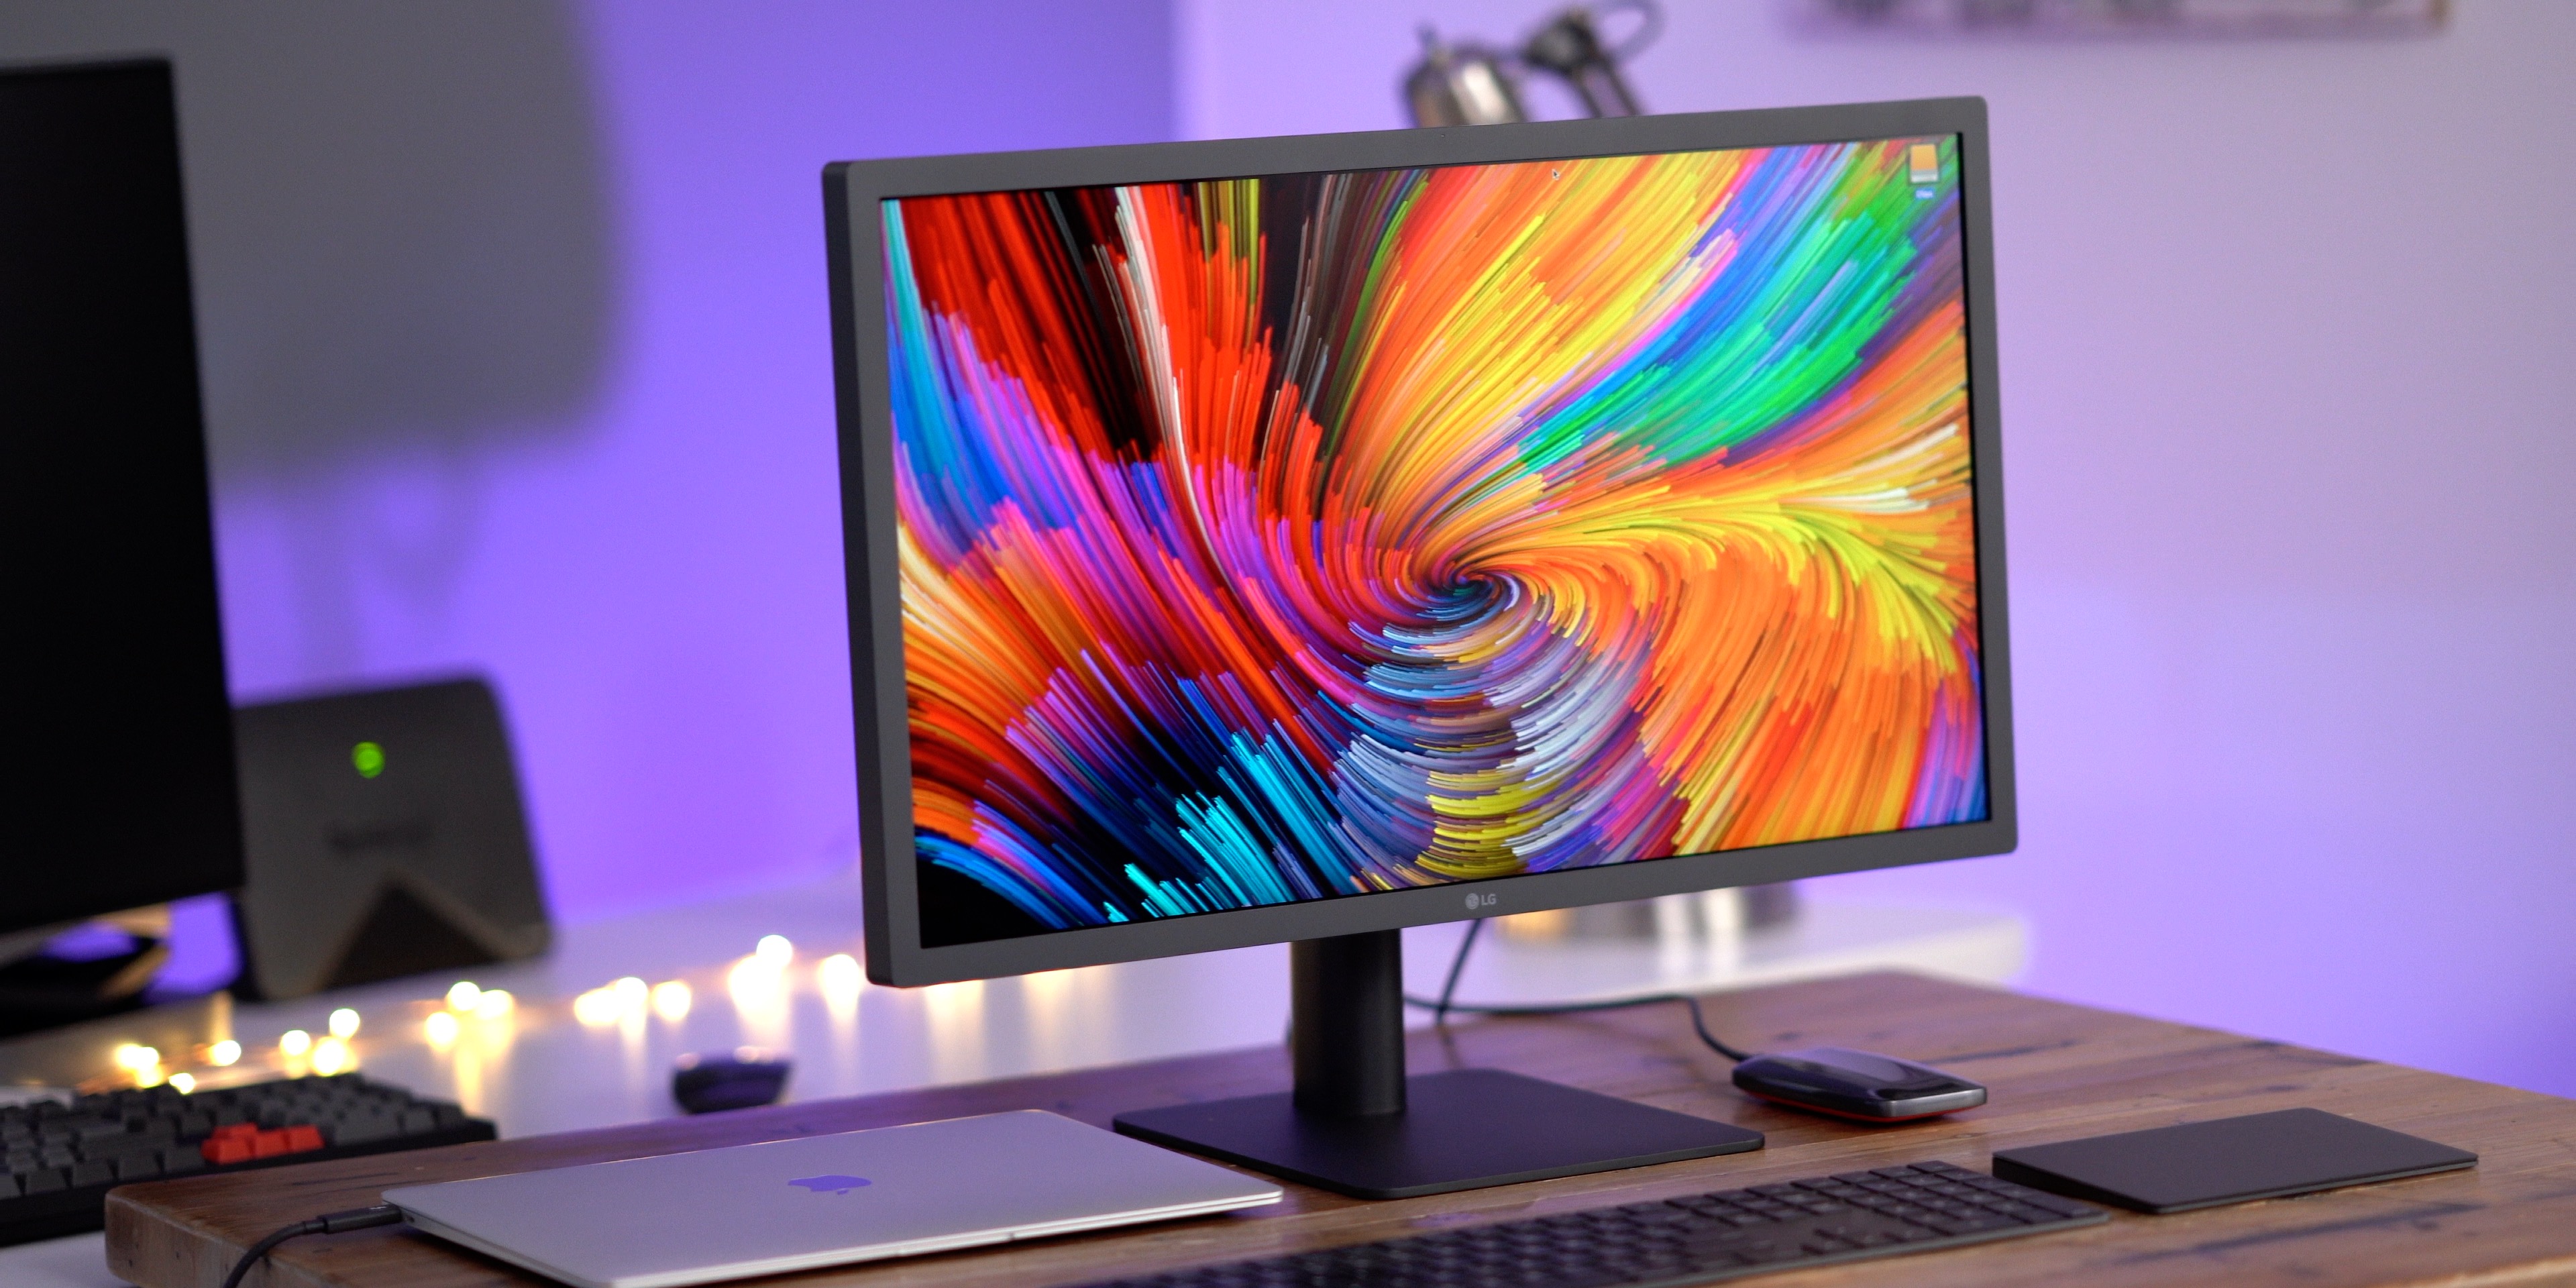 The LG Ultrafine 4k Display review